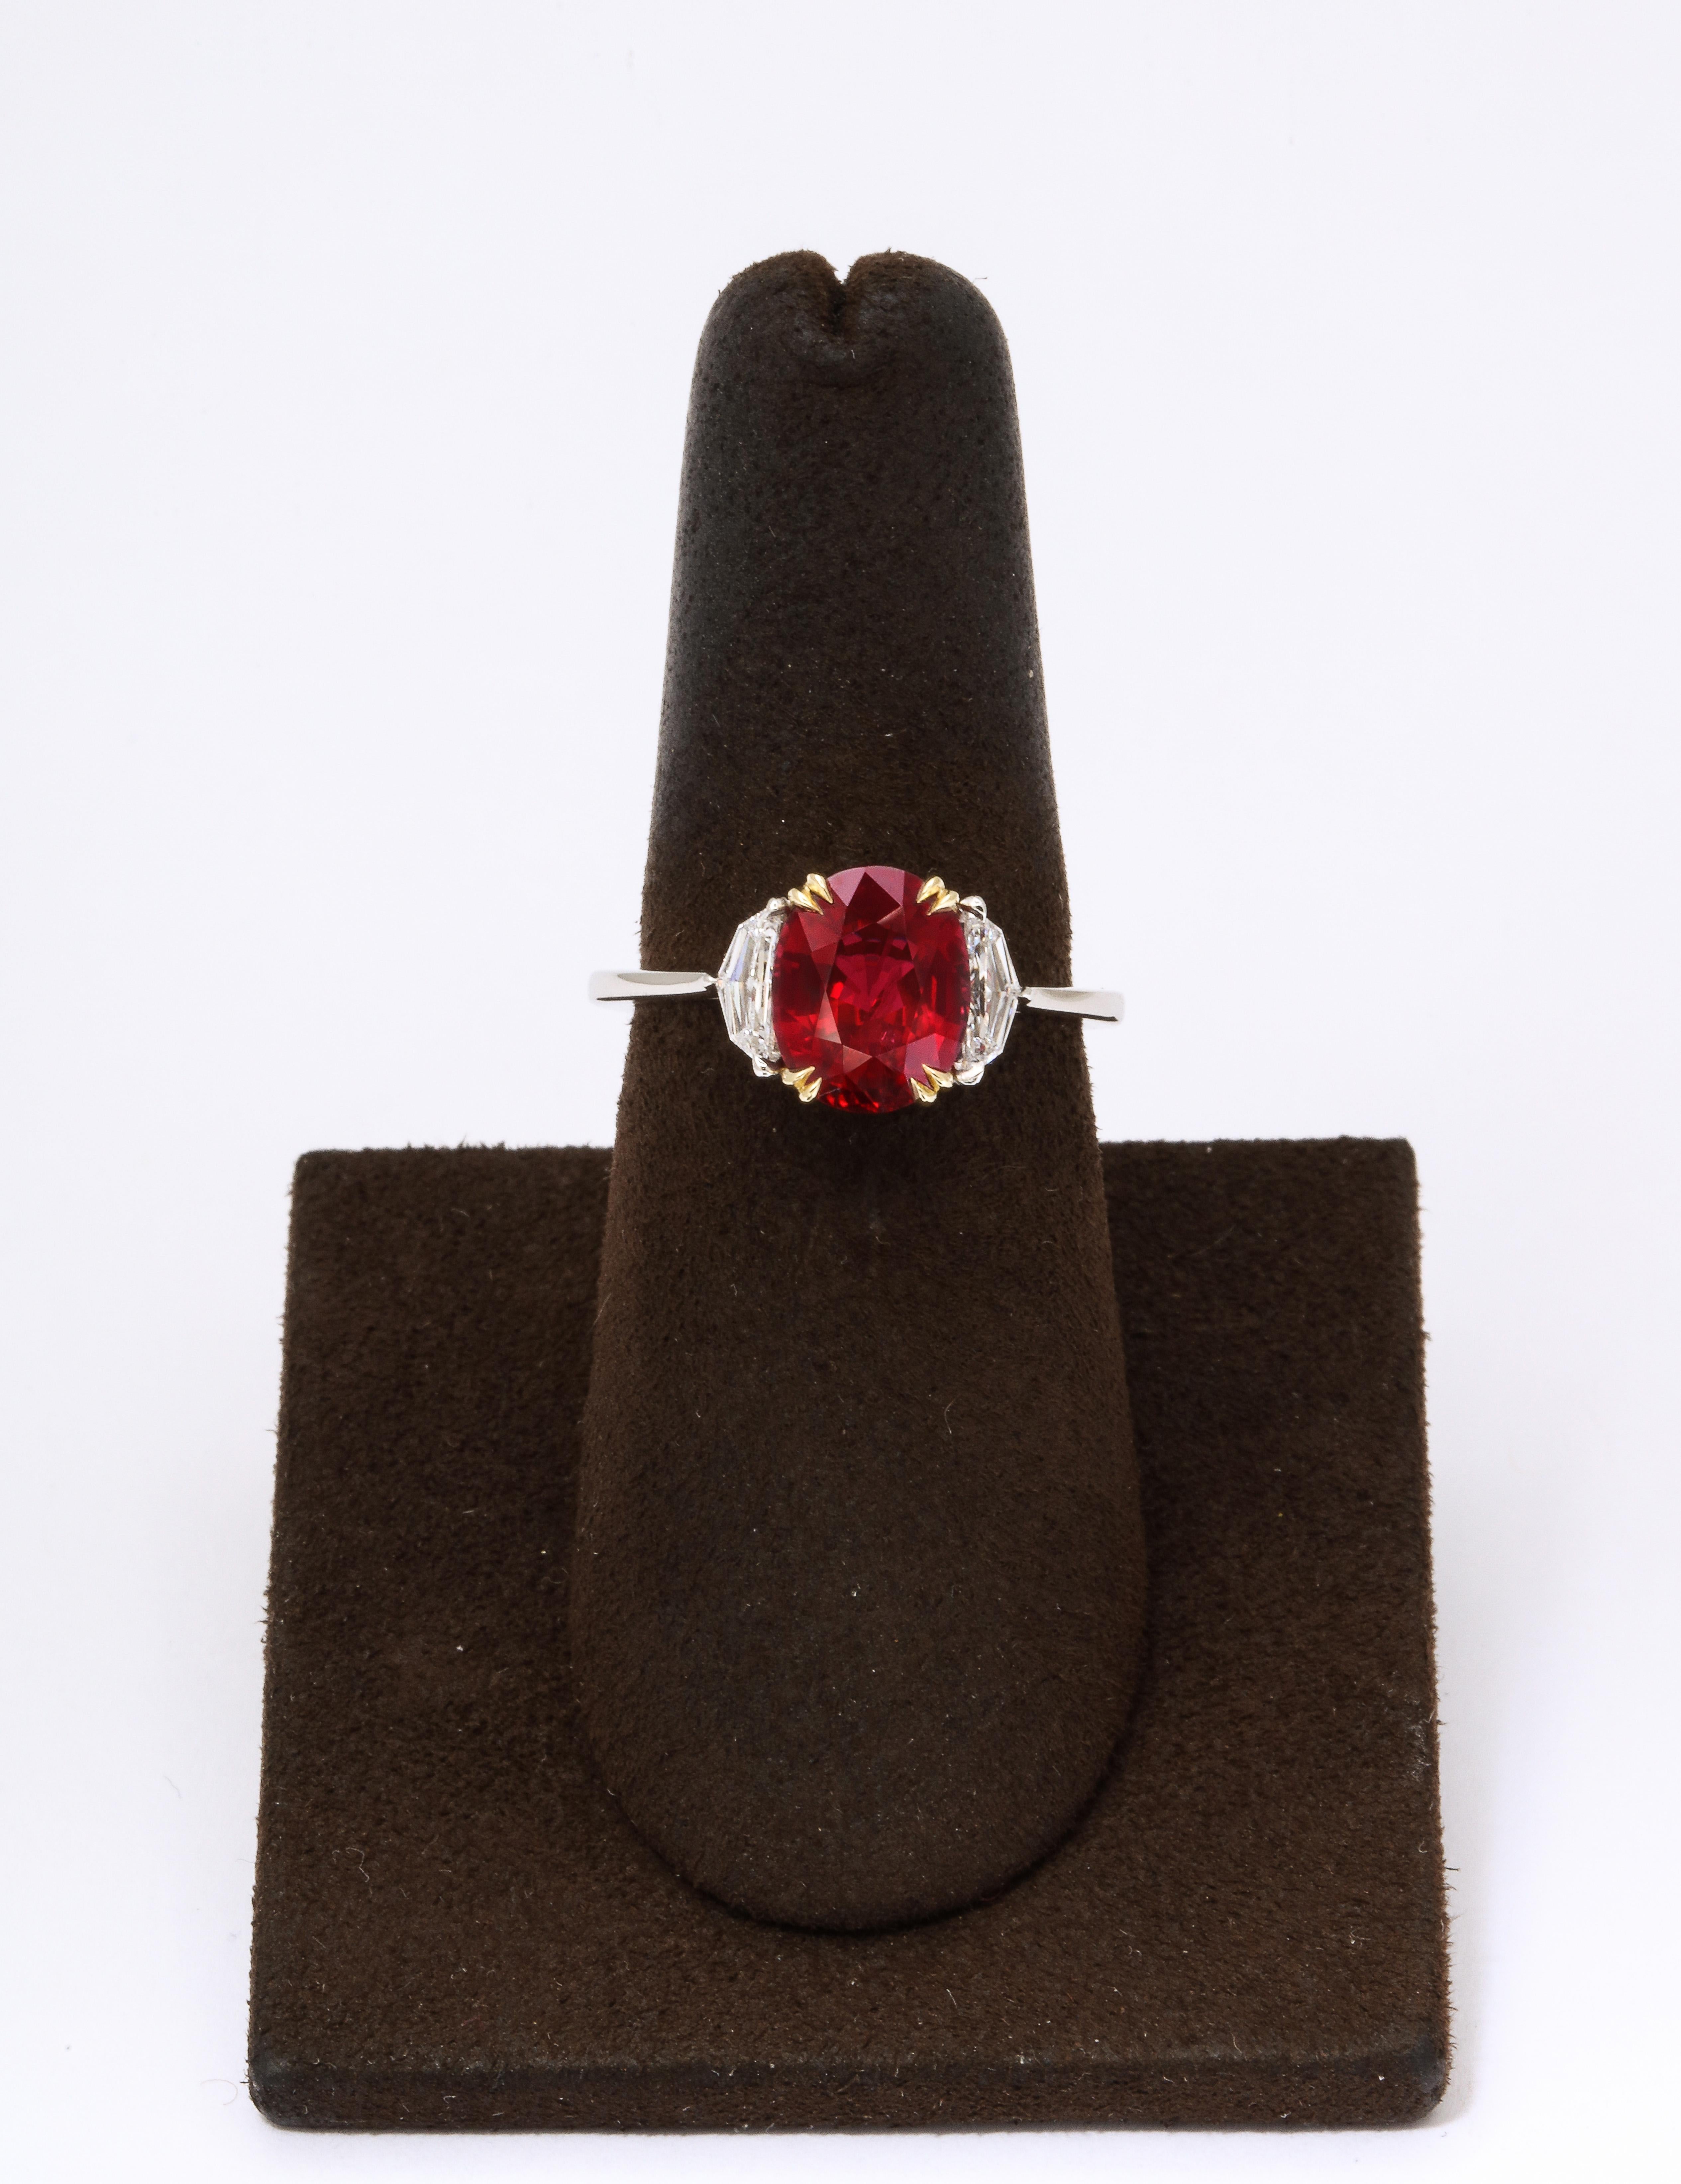 
A SPECTACULAR Ruby!

Certified “Vivid Red” 3.10 carat Ruby. 

.34 carats of colorless side diamonds. 

Set in a custom platinum and 18k yellow gold mounting. 

Currently a size 6.5, this ring can be sized to any finger size 

Certified by C